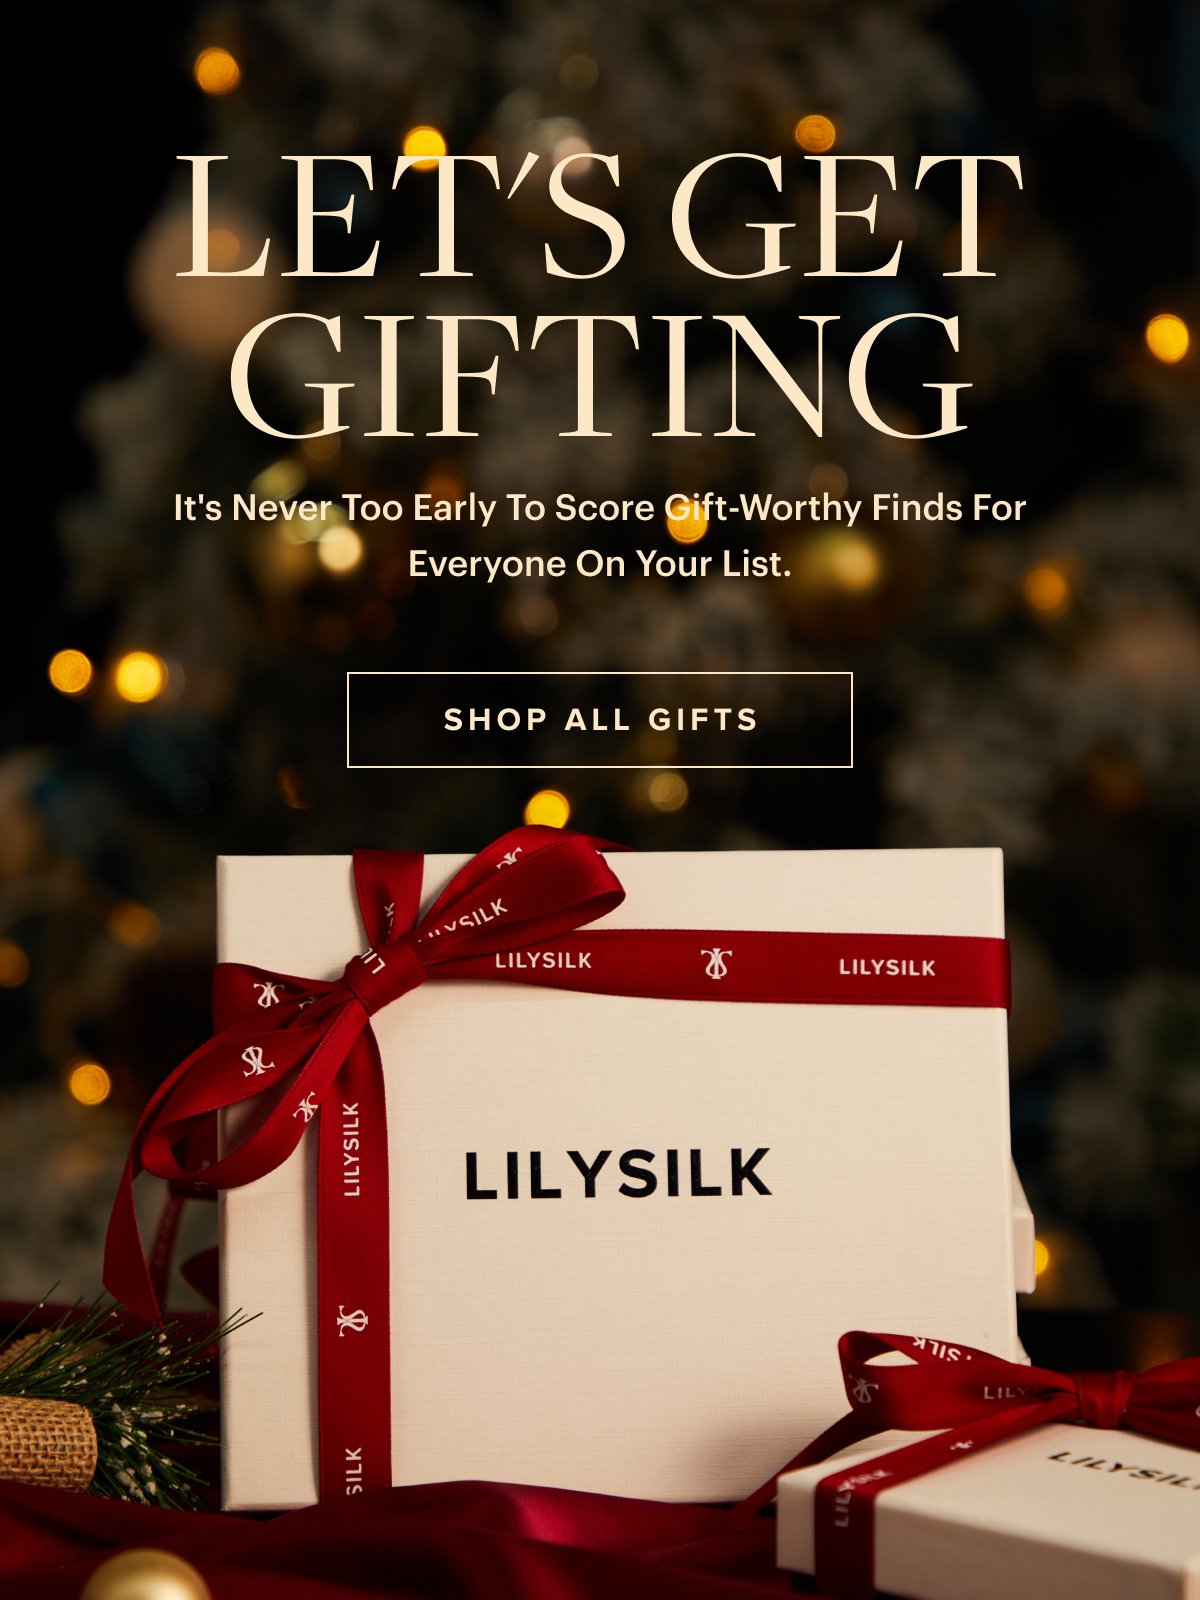 The best gifts of the year are here! Lily Silk